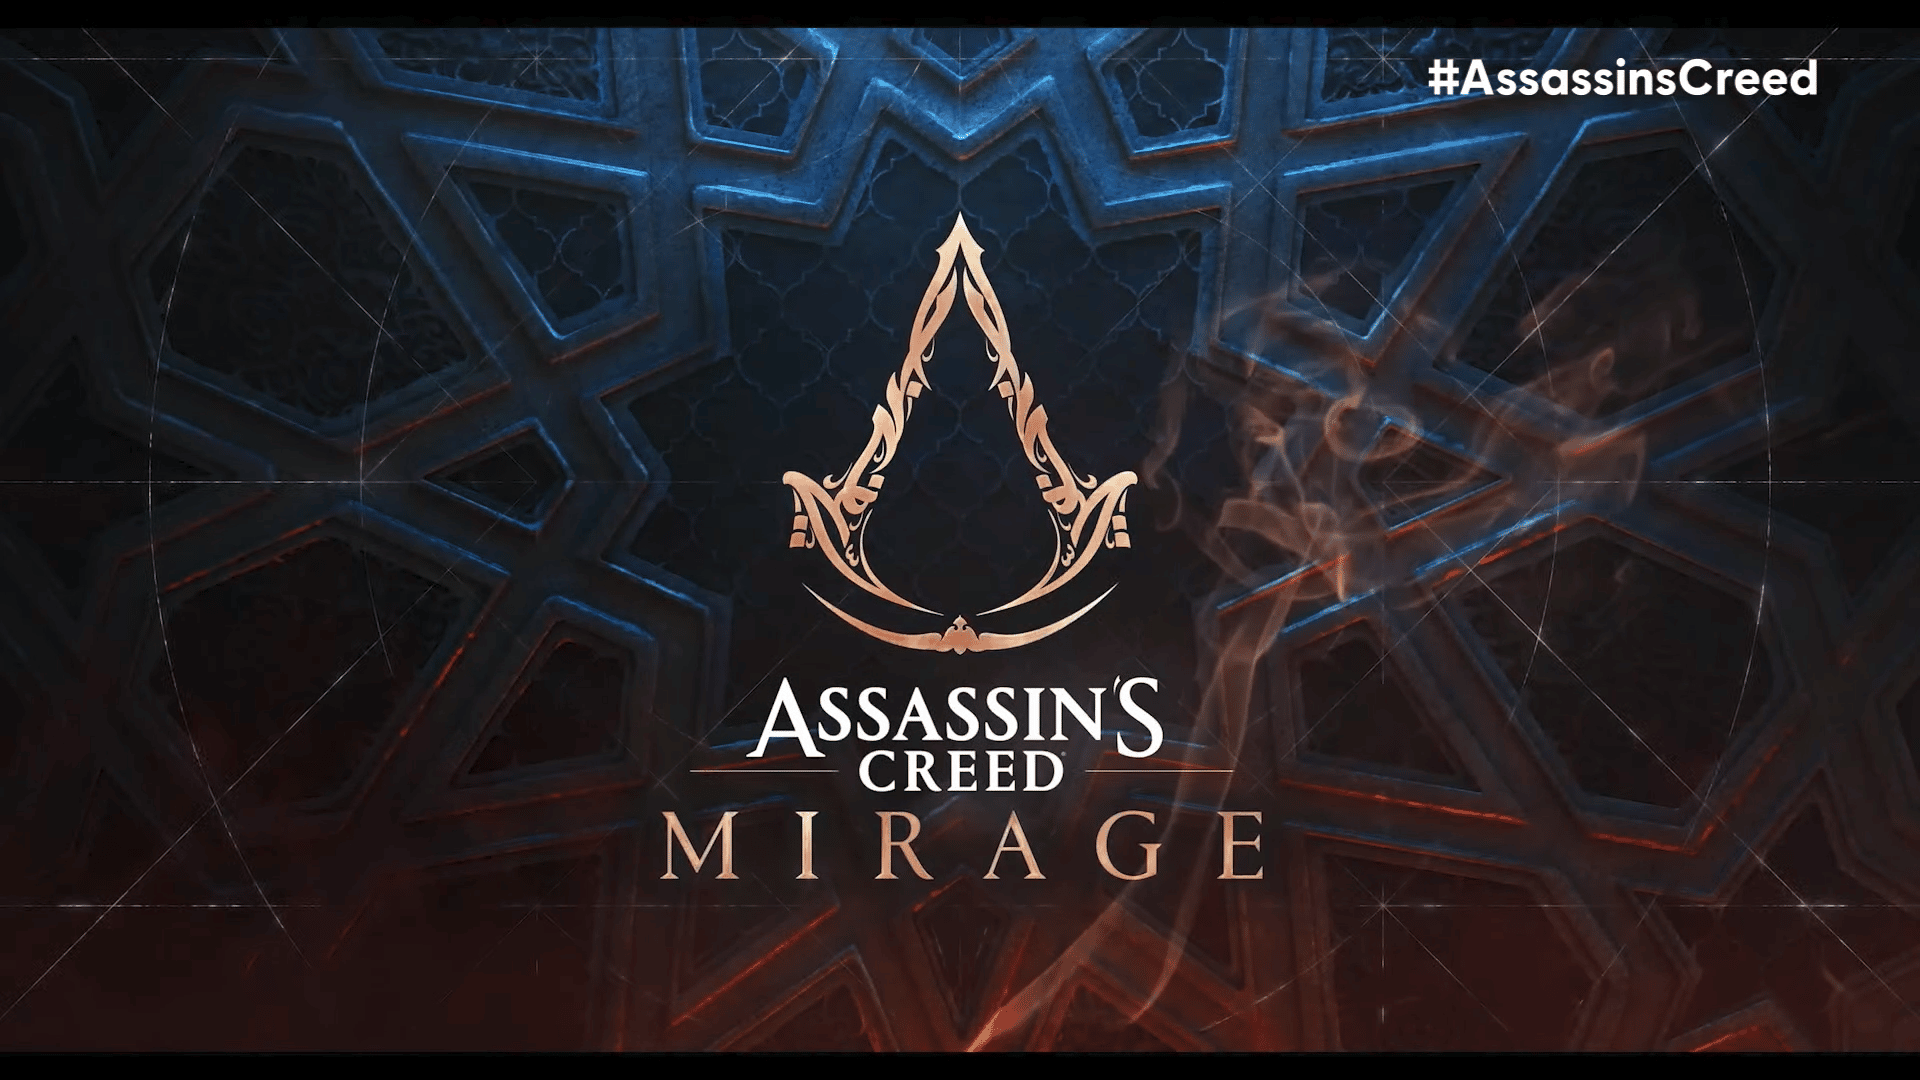 Assassin’s Creed Mirage Announcement Trailer, 2023 Release; 20 Years Before Valhalla, Takes Place In Baghdad